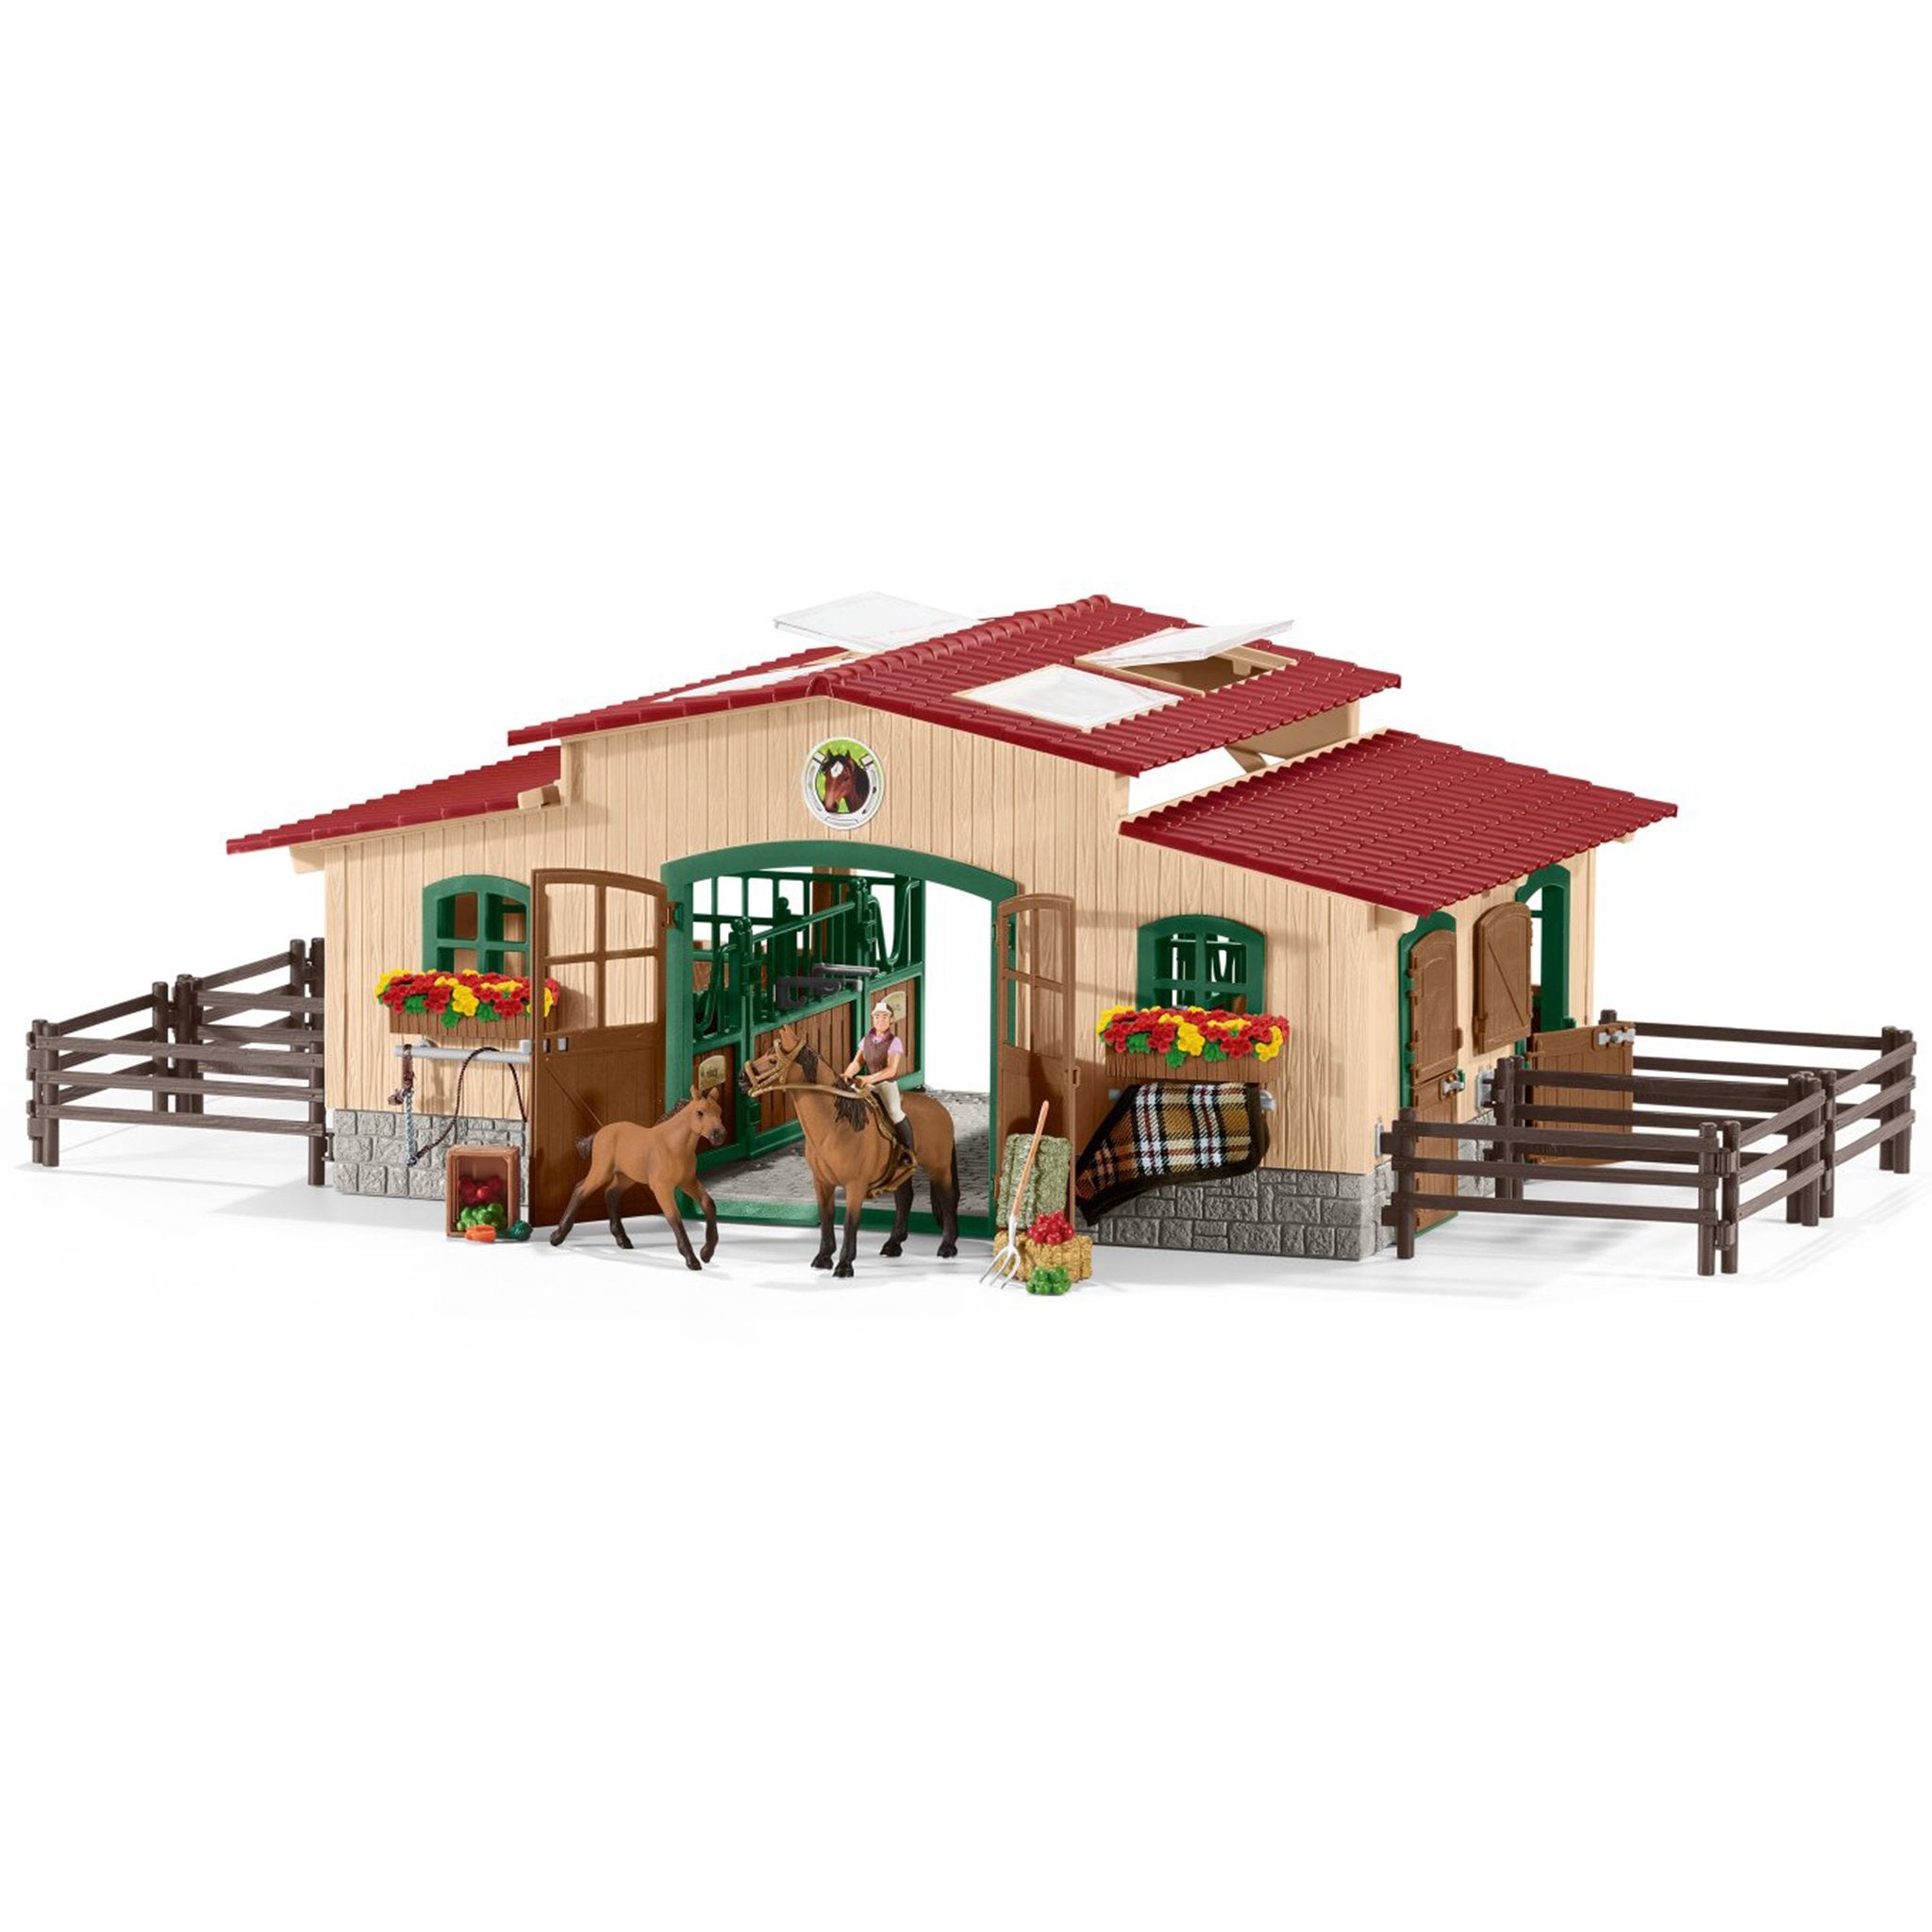 Schleich Stable with Horses and 